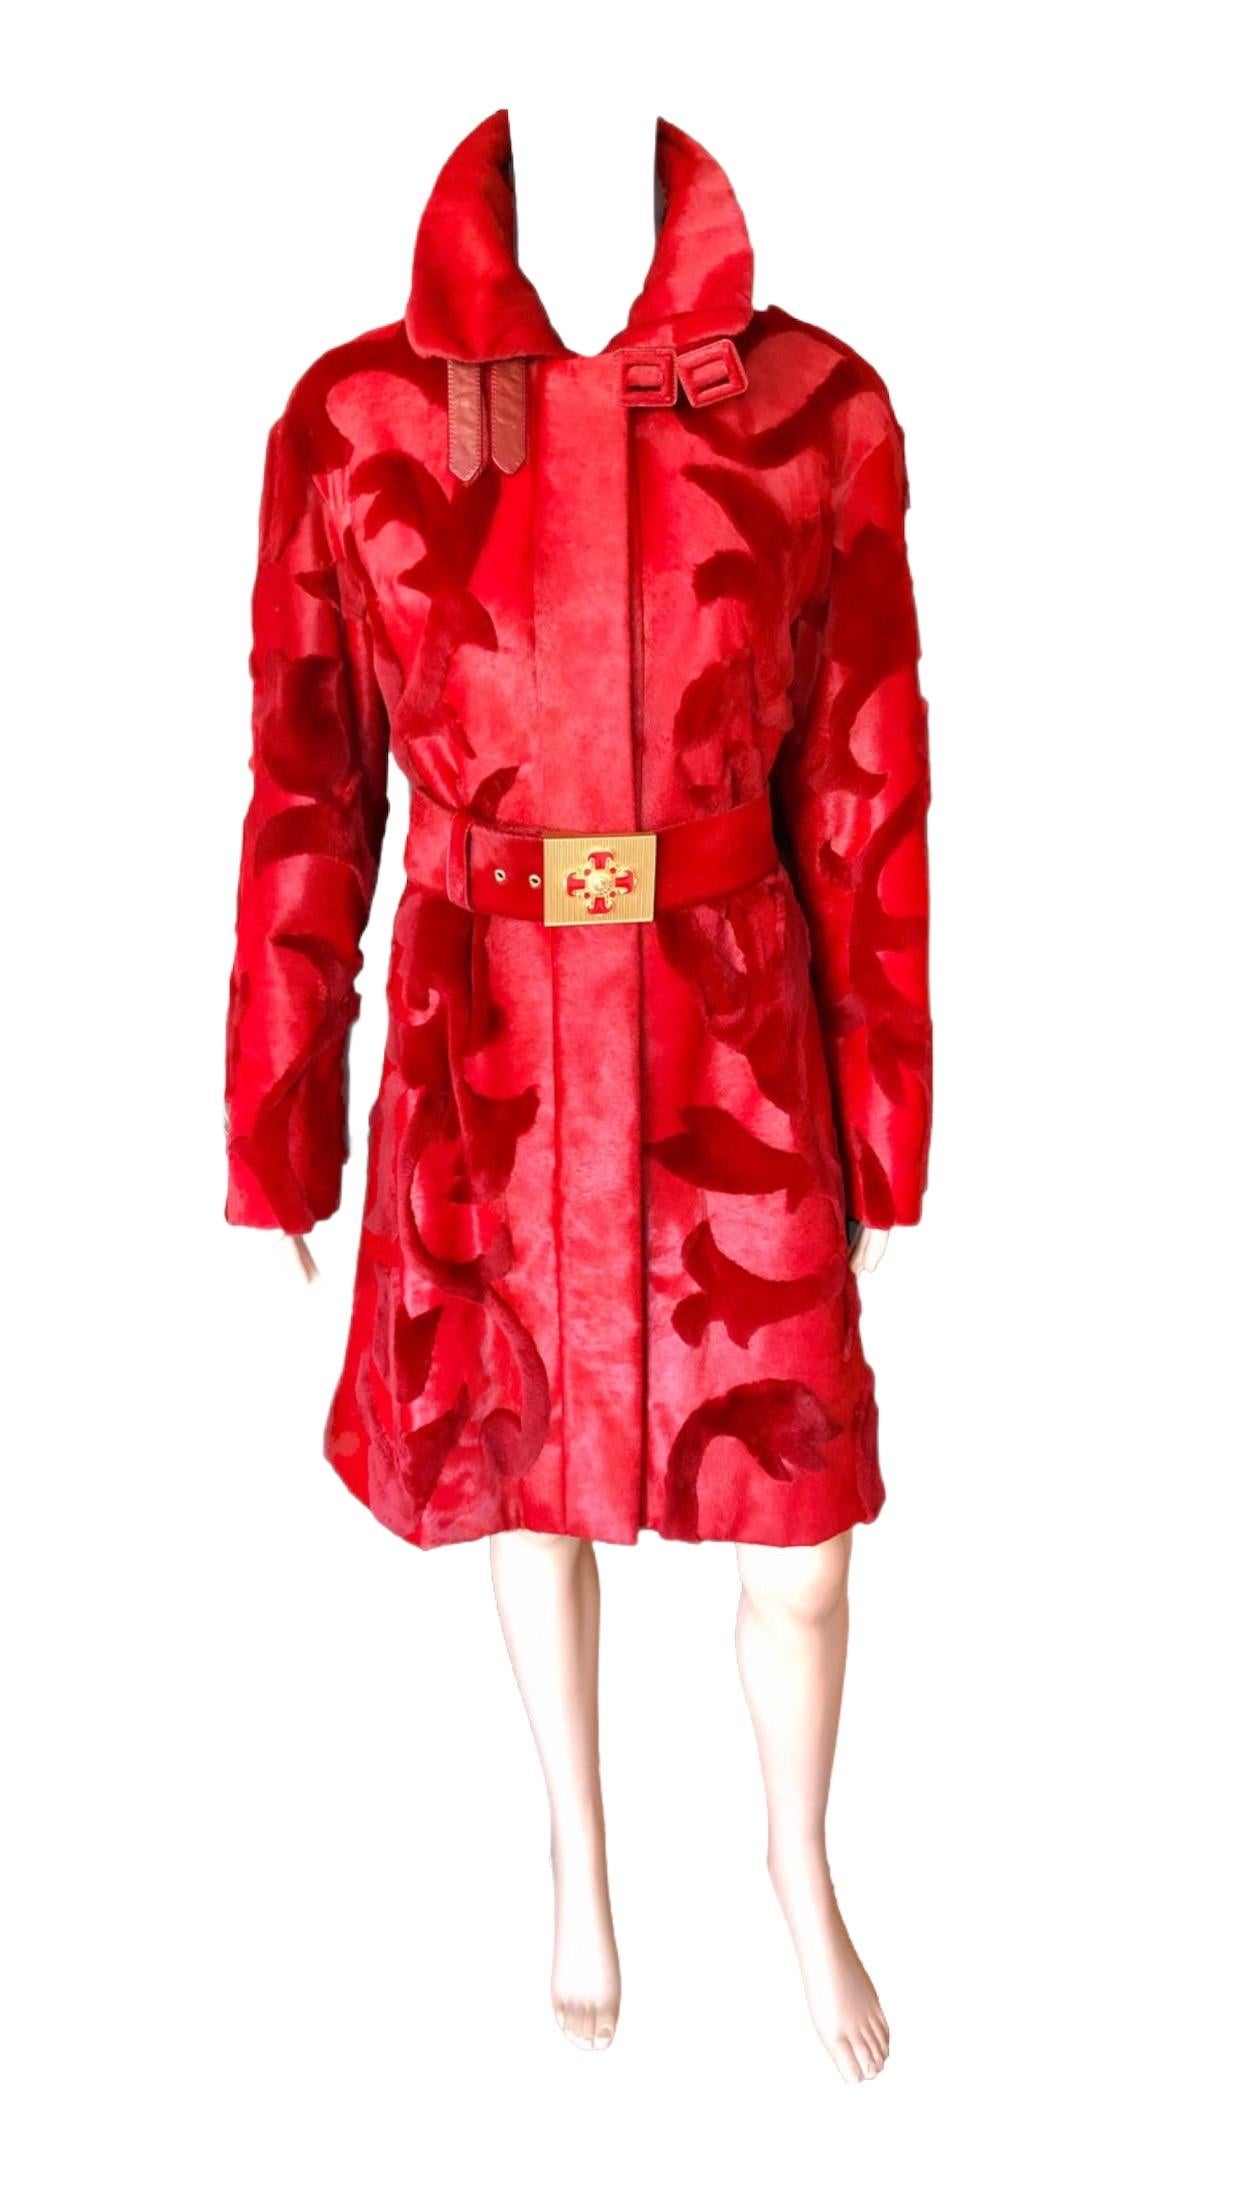 Versace F/W 2011 Runway Mink Fur and Leather Belted Knee-Length Red Jacket Coat For Sale 5